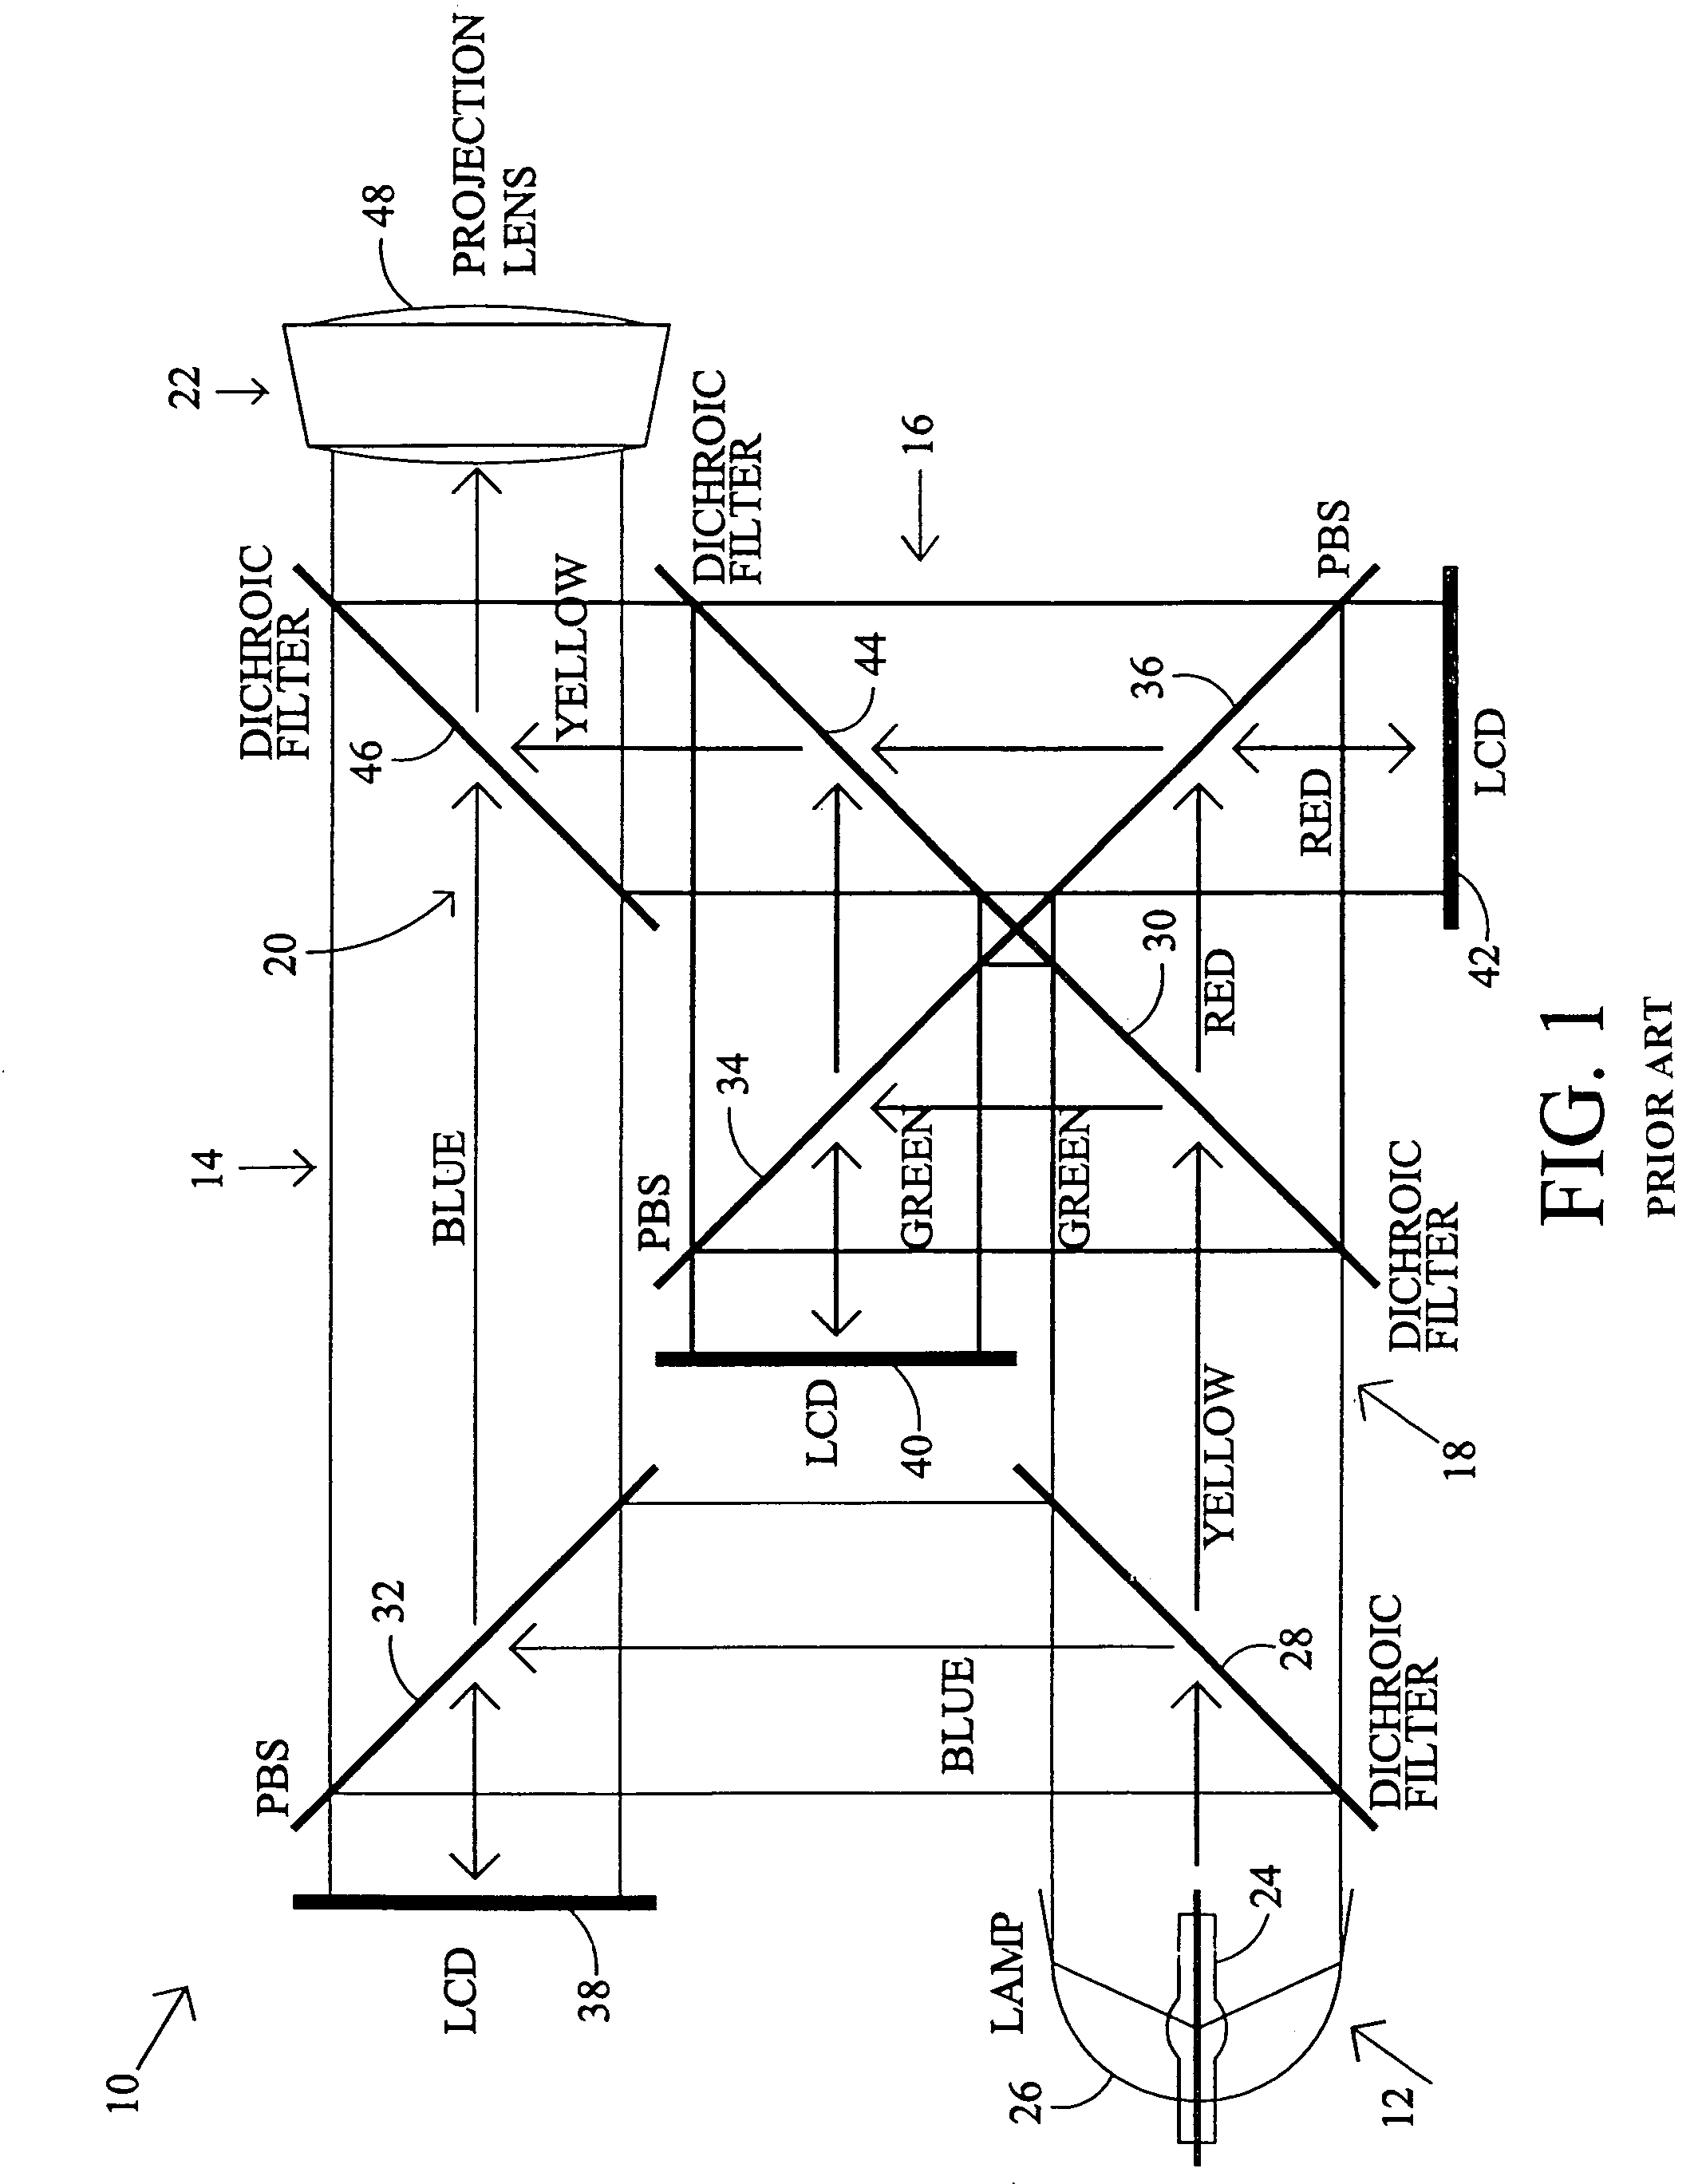 Projection display system using polarized light